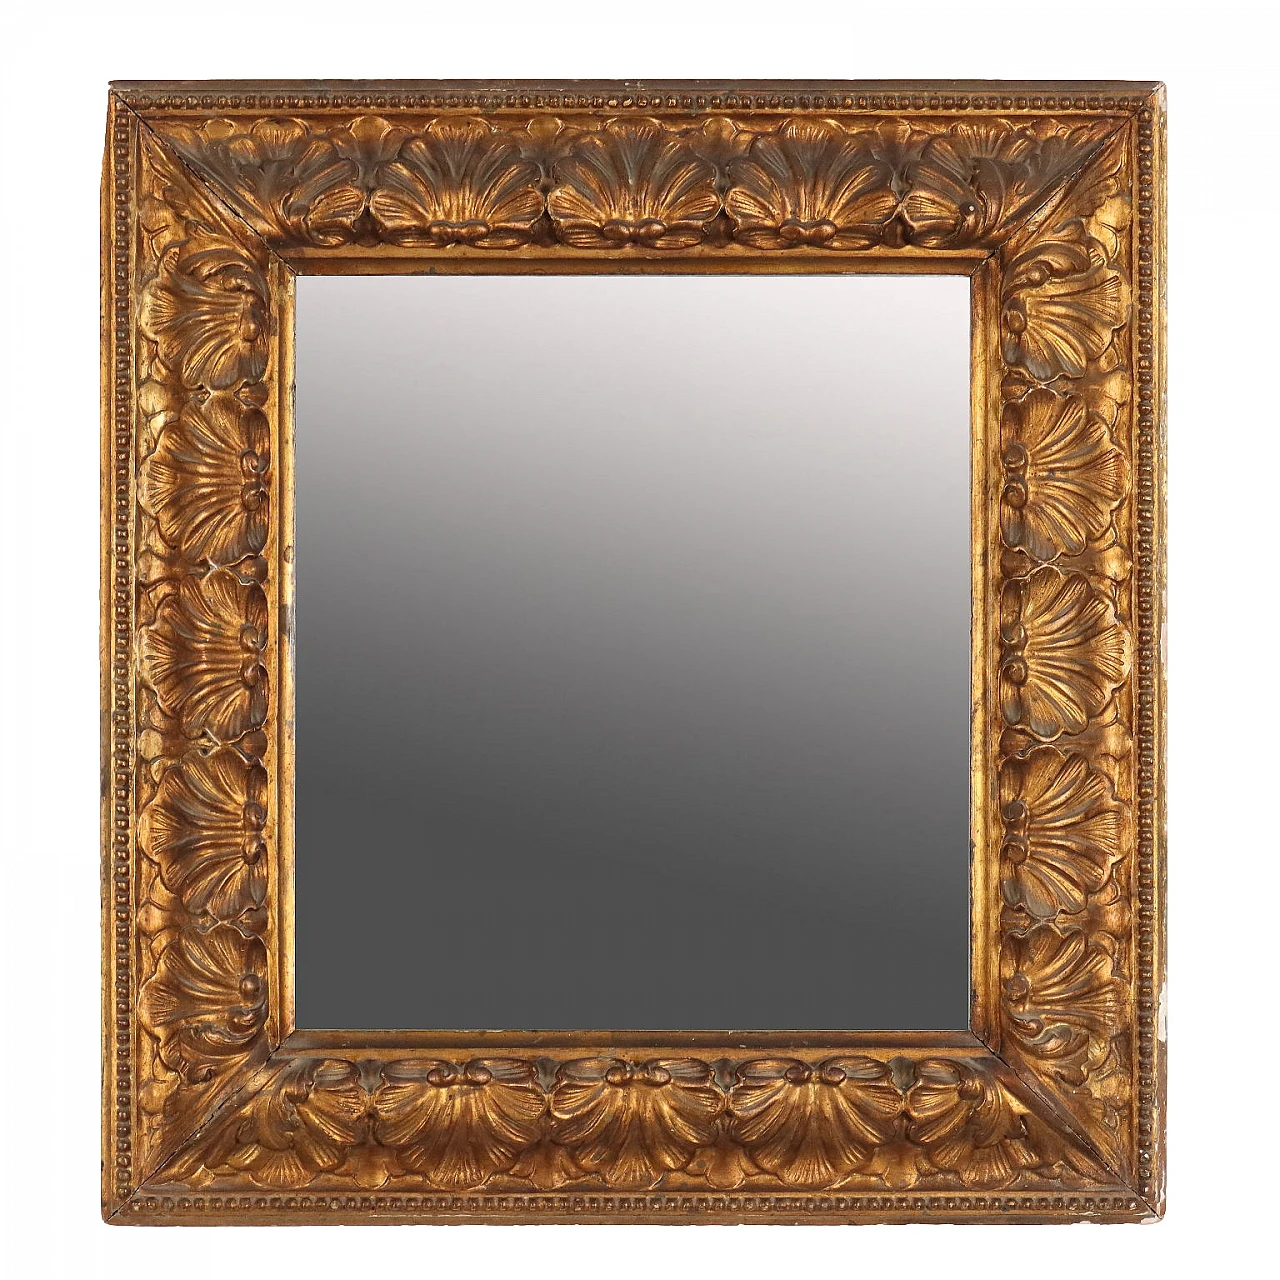 Mirror with gilded wood frame and floral motifs 1